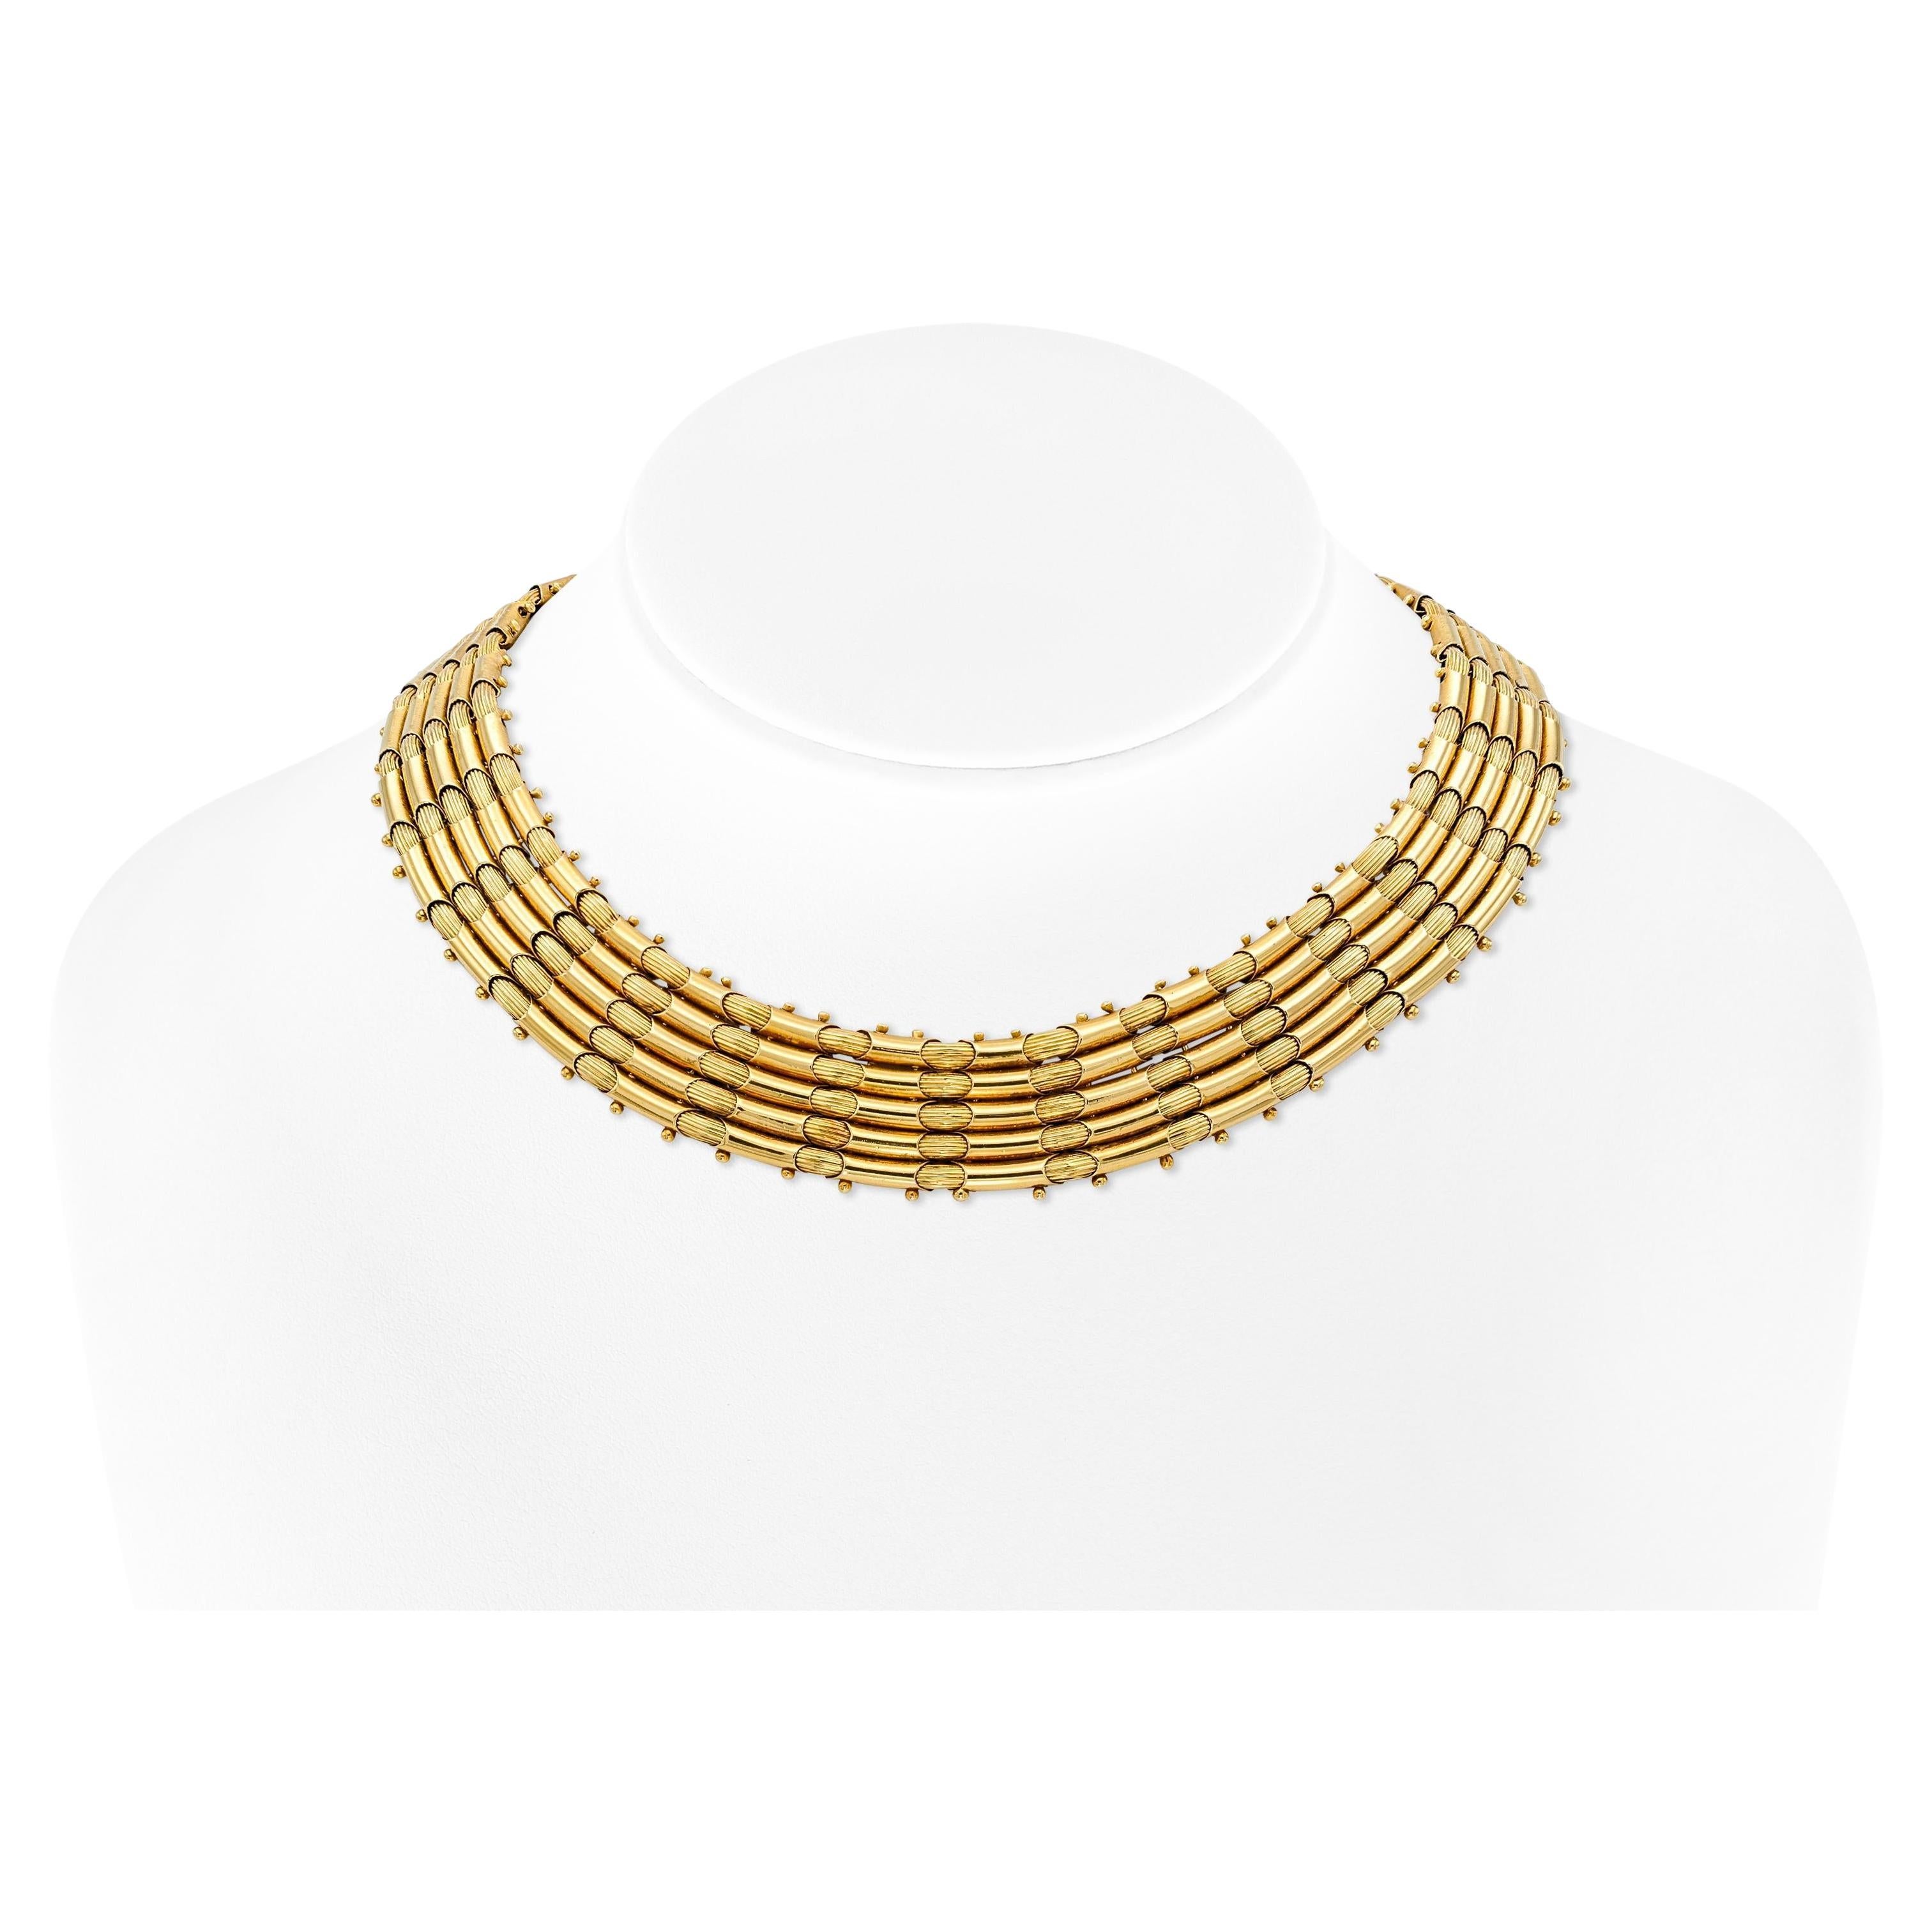 Vintage 1960s Lalaounis Gold Collar Necklace